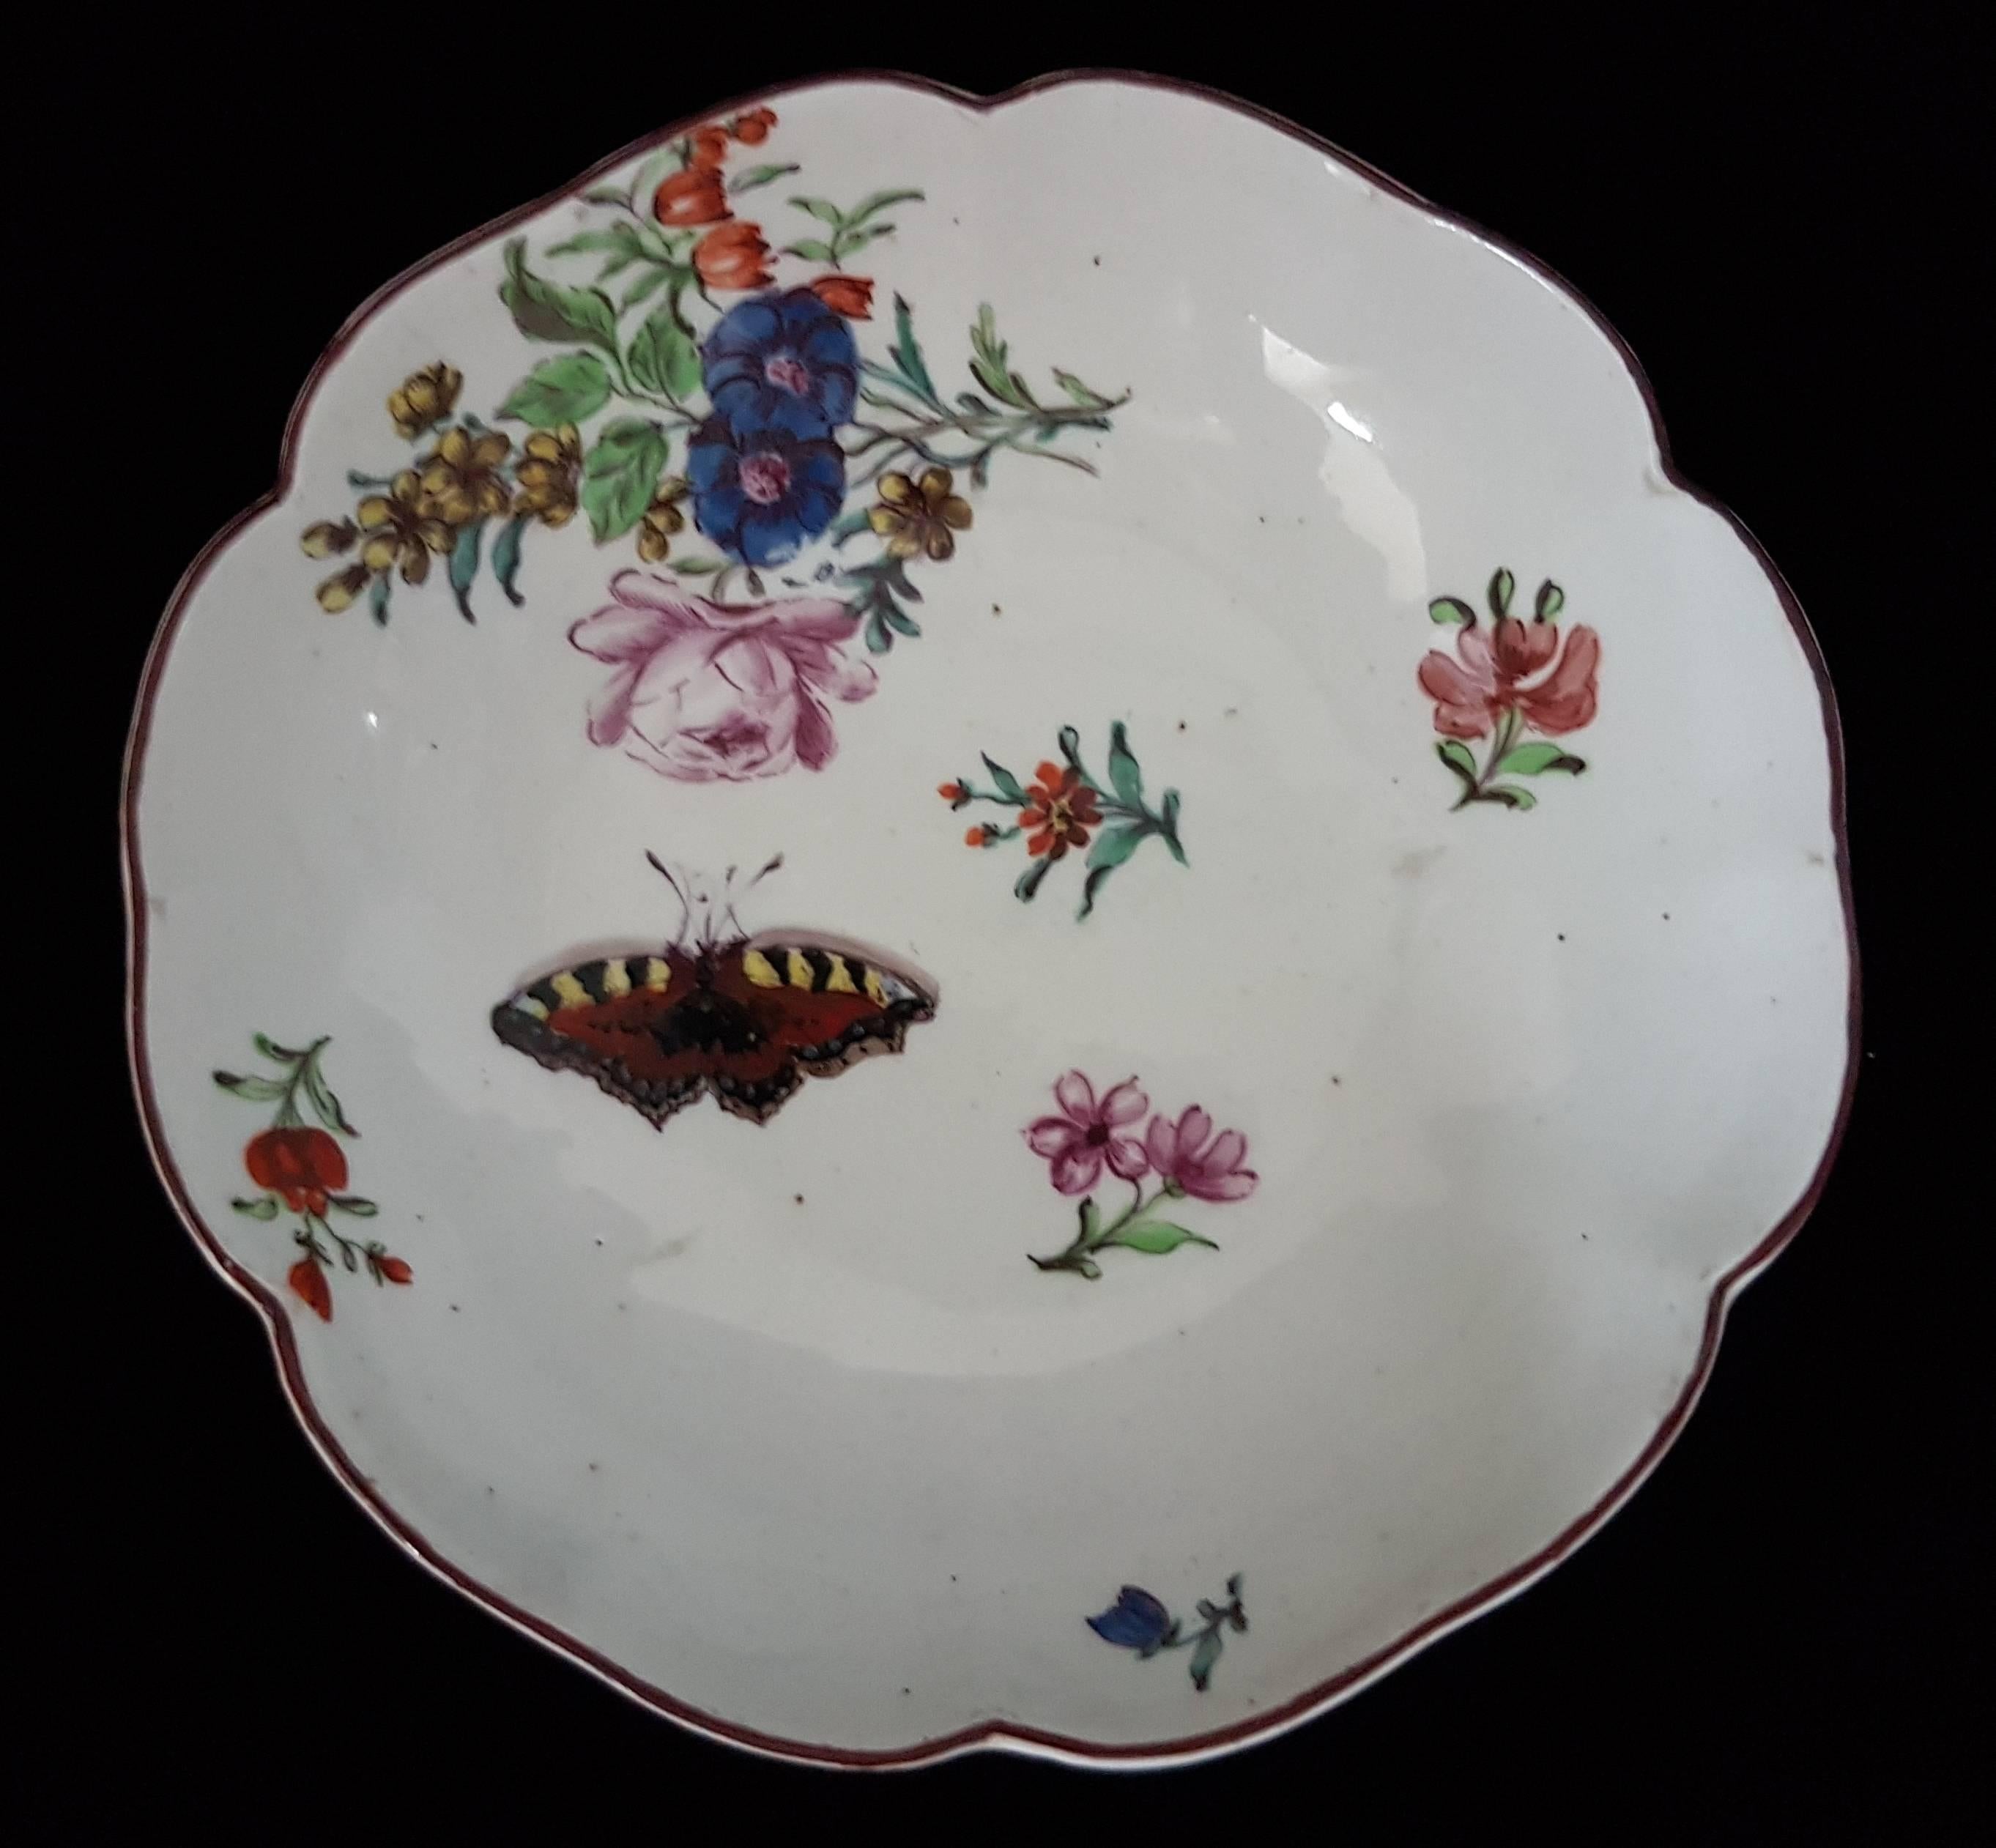 From early in the red anchor period, a fluted tea bowl and saucer, exquisitely painted with flowers and insects.